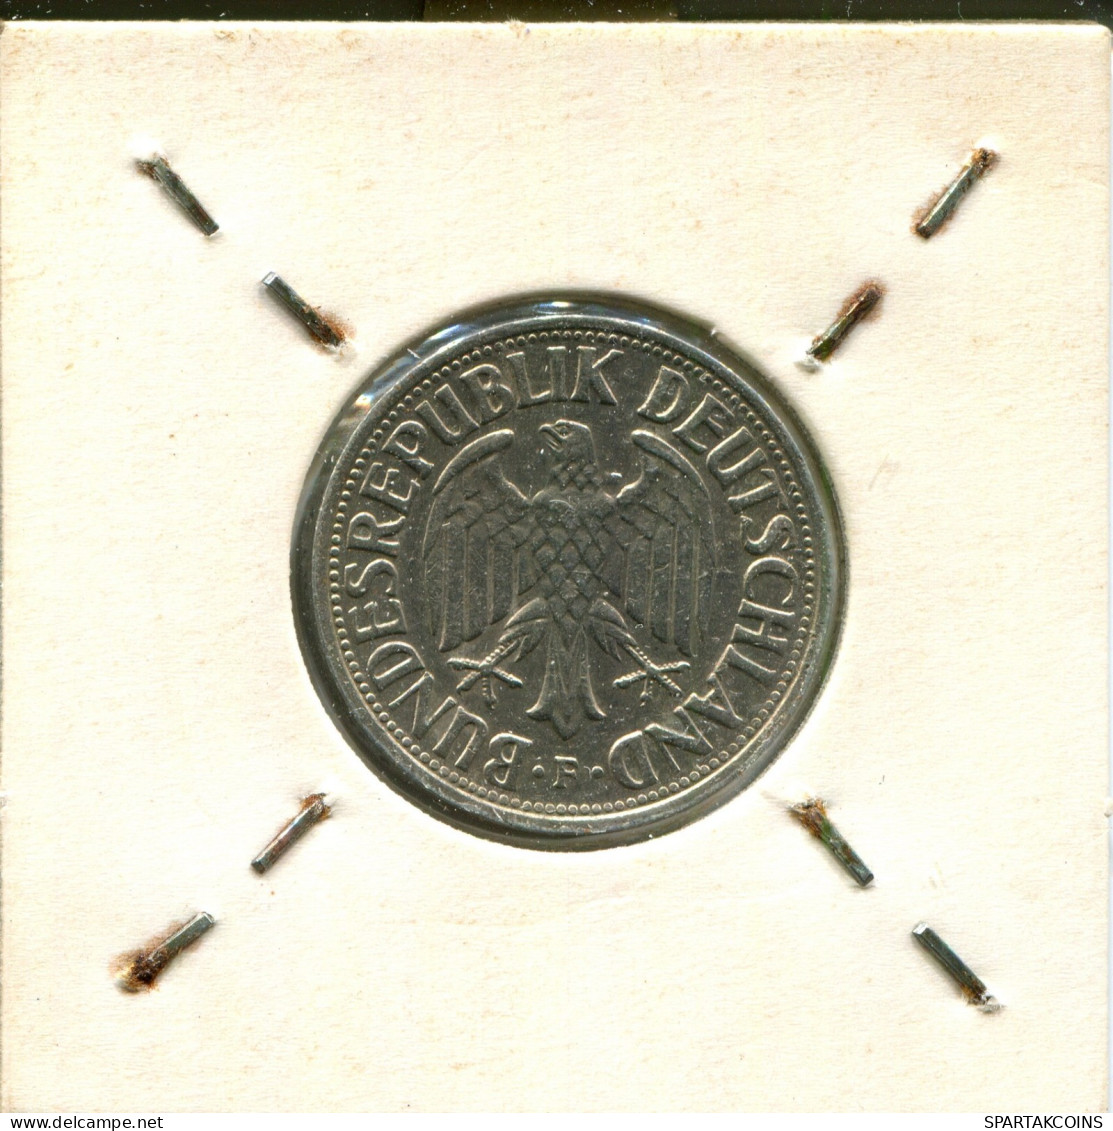 1 DM 1962 F ALLEMAGNE Pièce GERMANY #AW495.F.A - 1 Marco